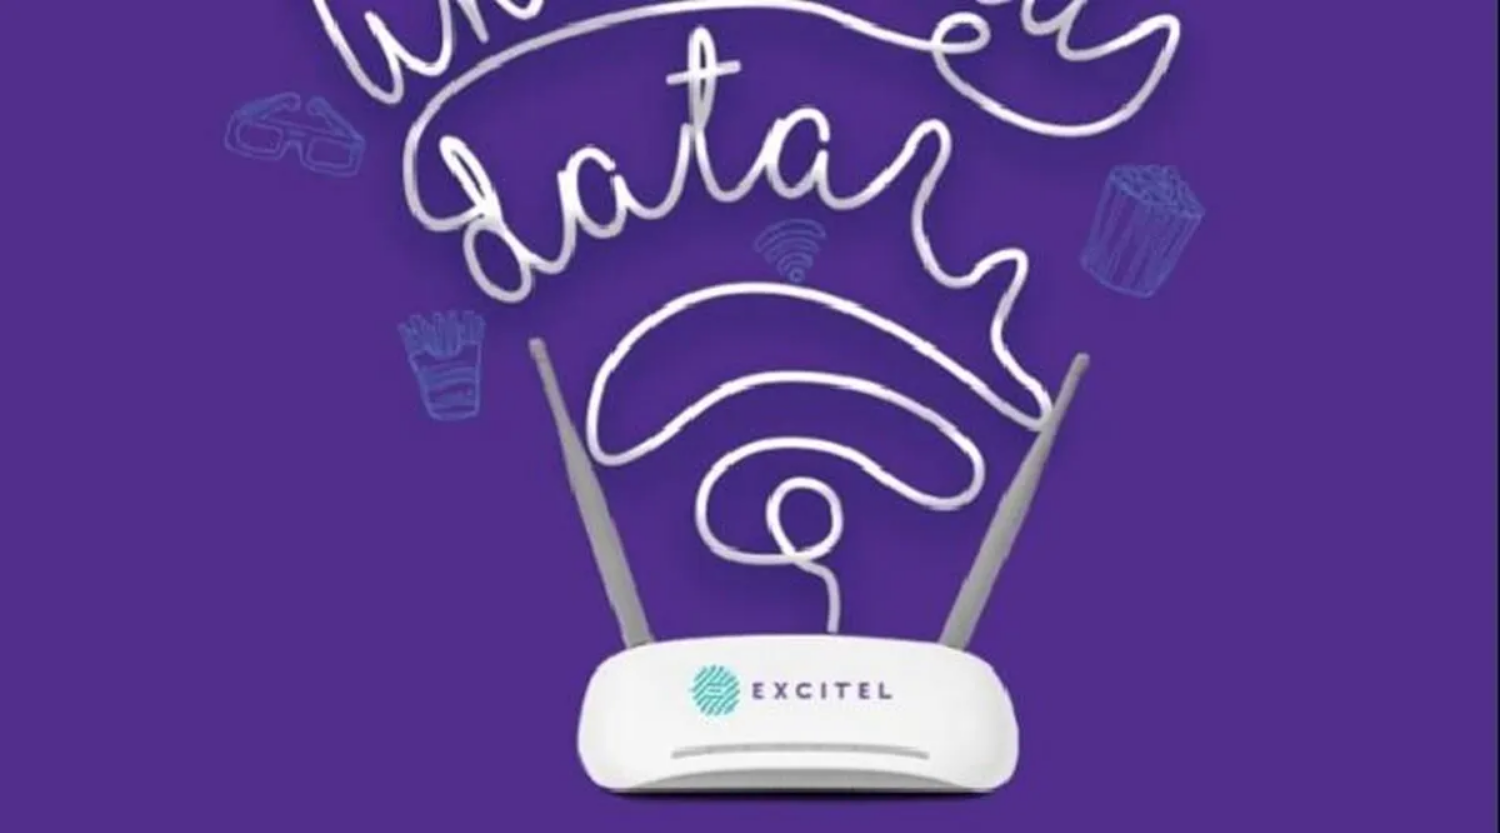 Excitel announces new broadband internet plans: Here’s everything you need to know